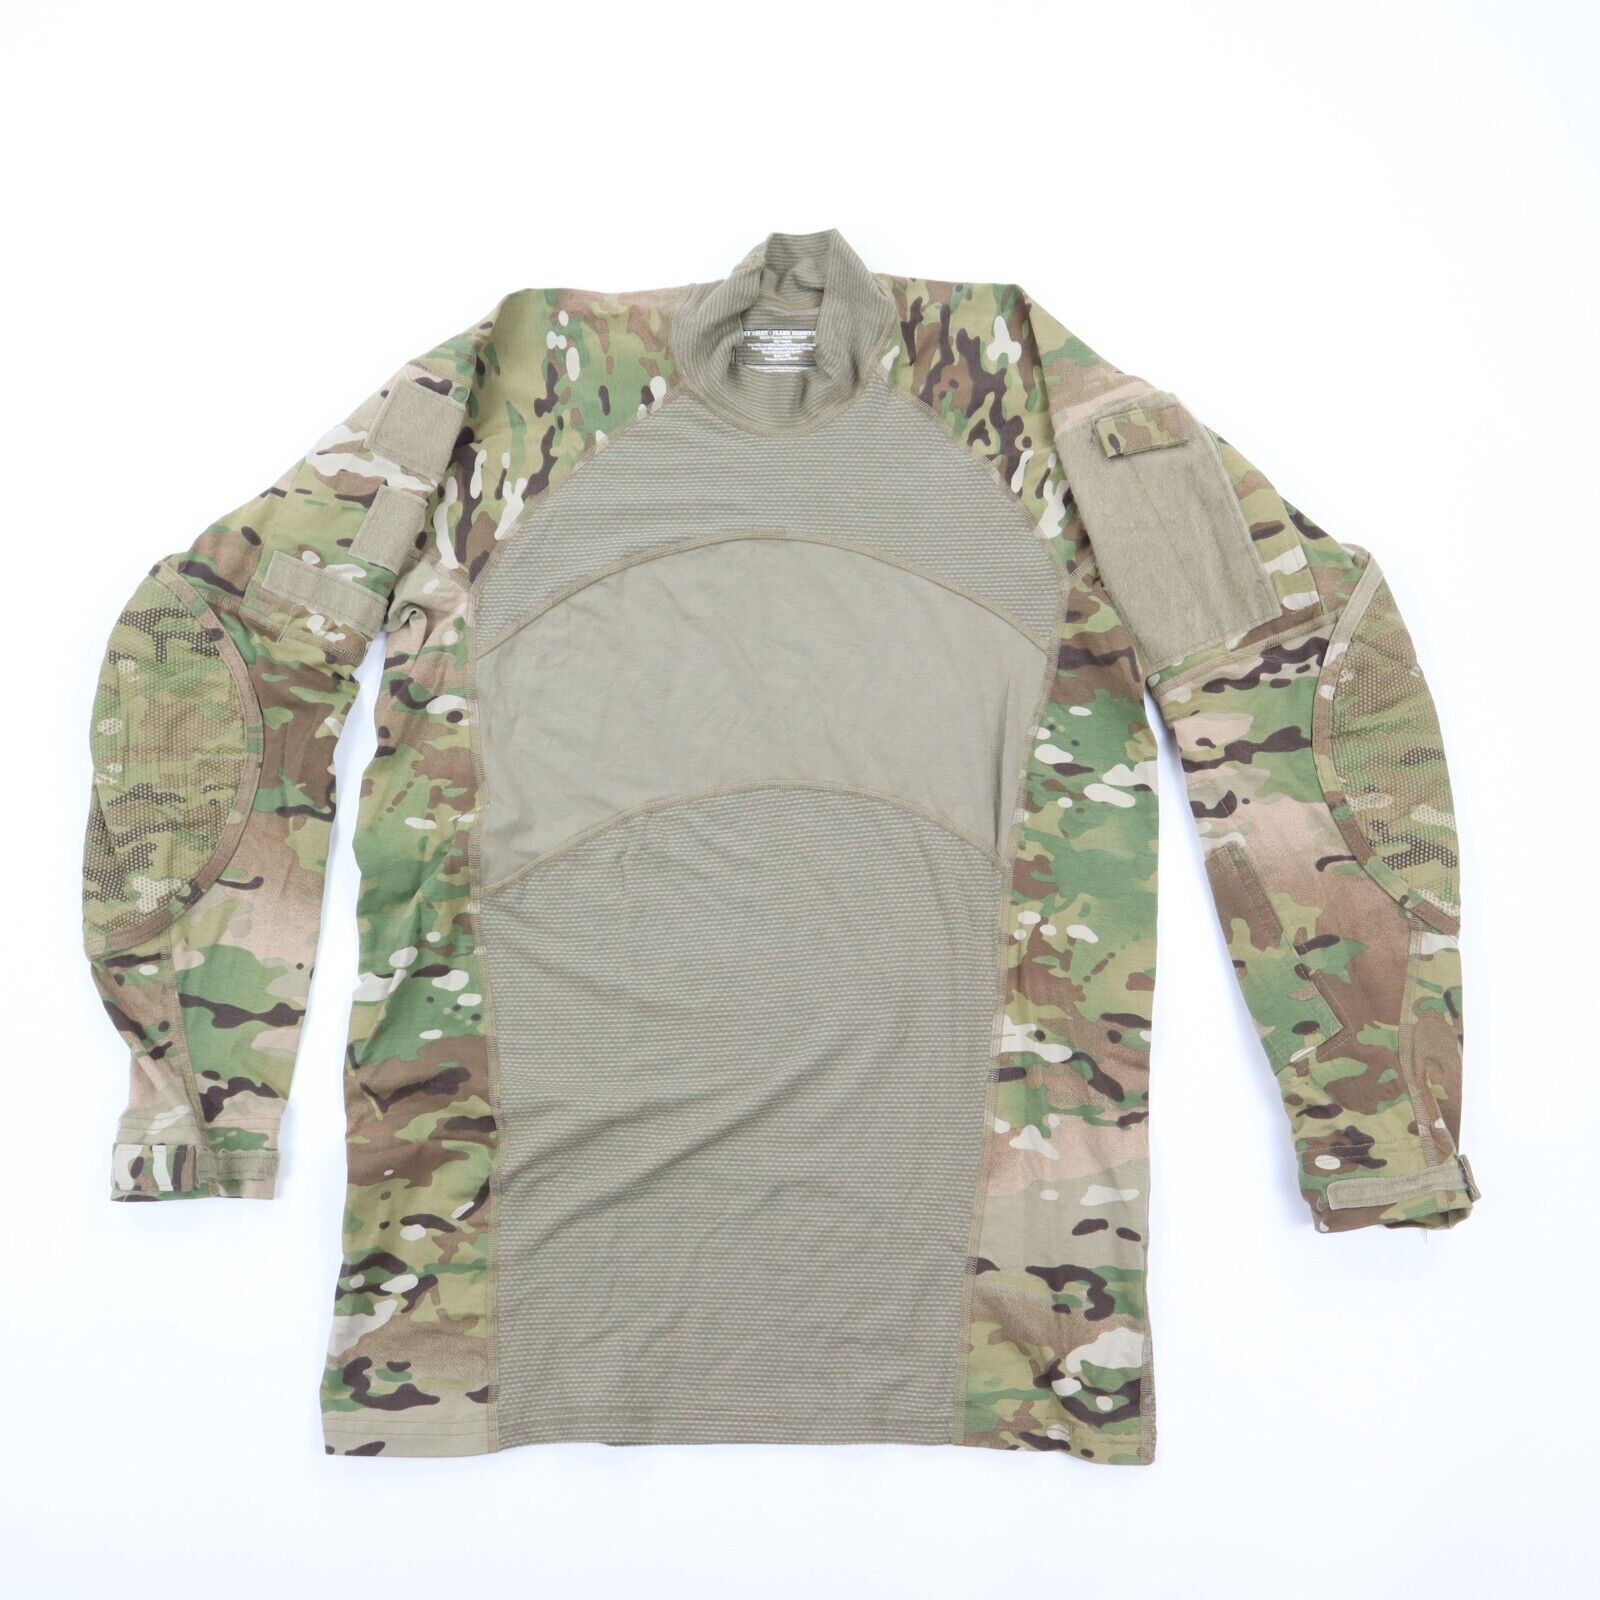 Army Combat Shirt FR Flame Resistant size M Medium Camouflage Tactical Military